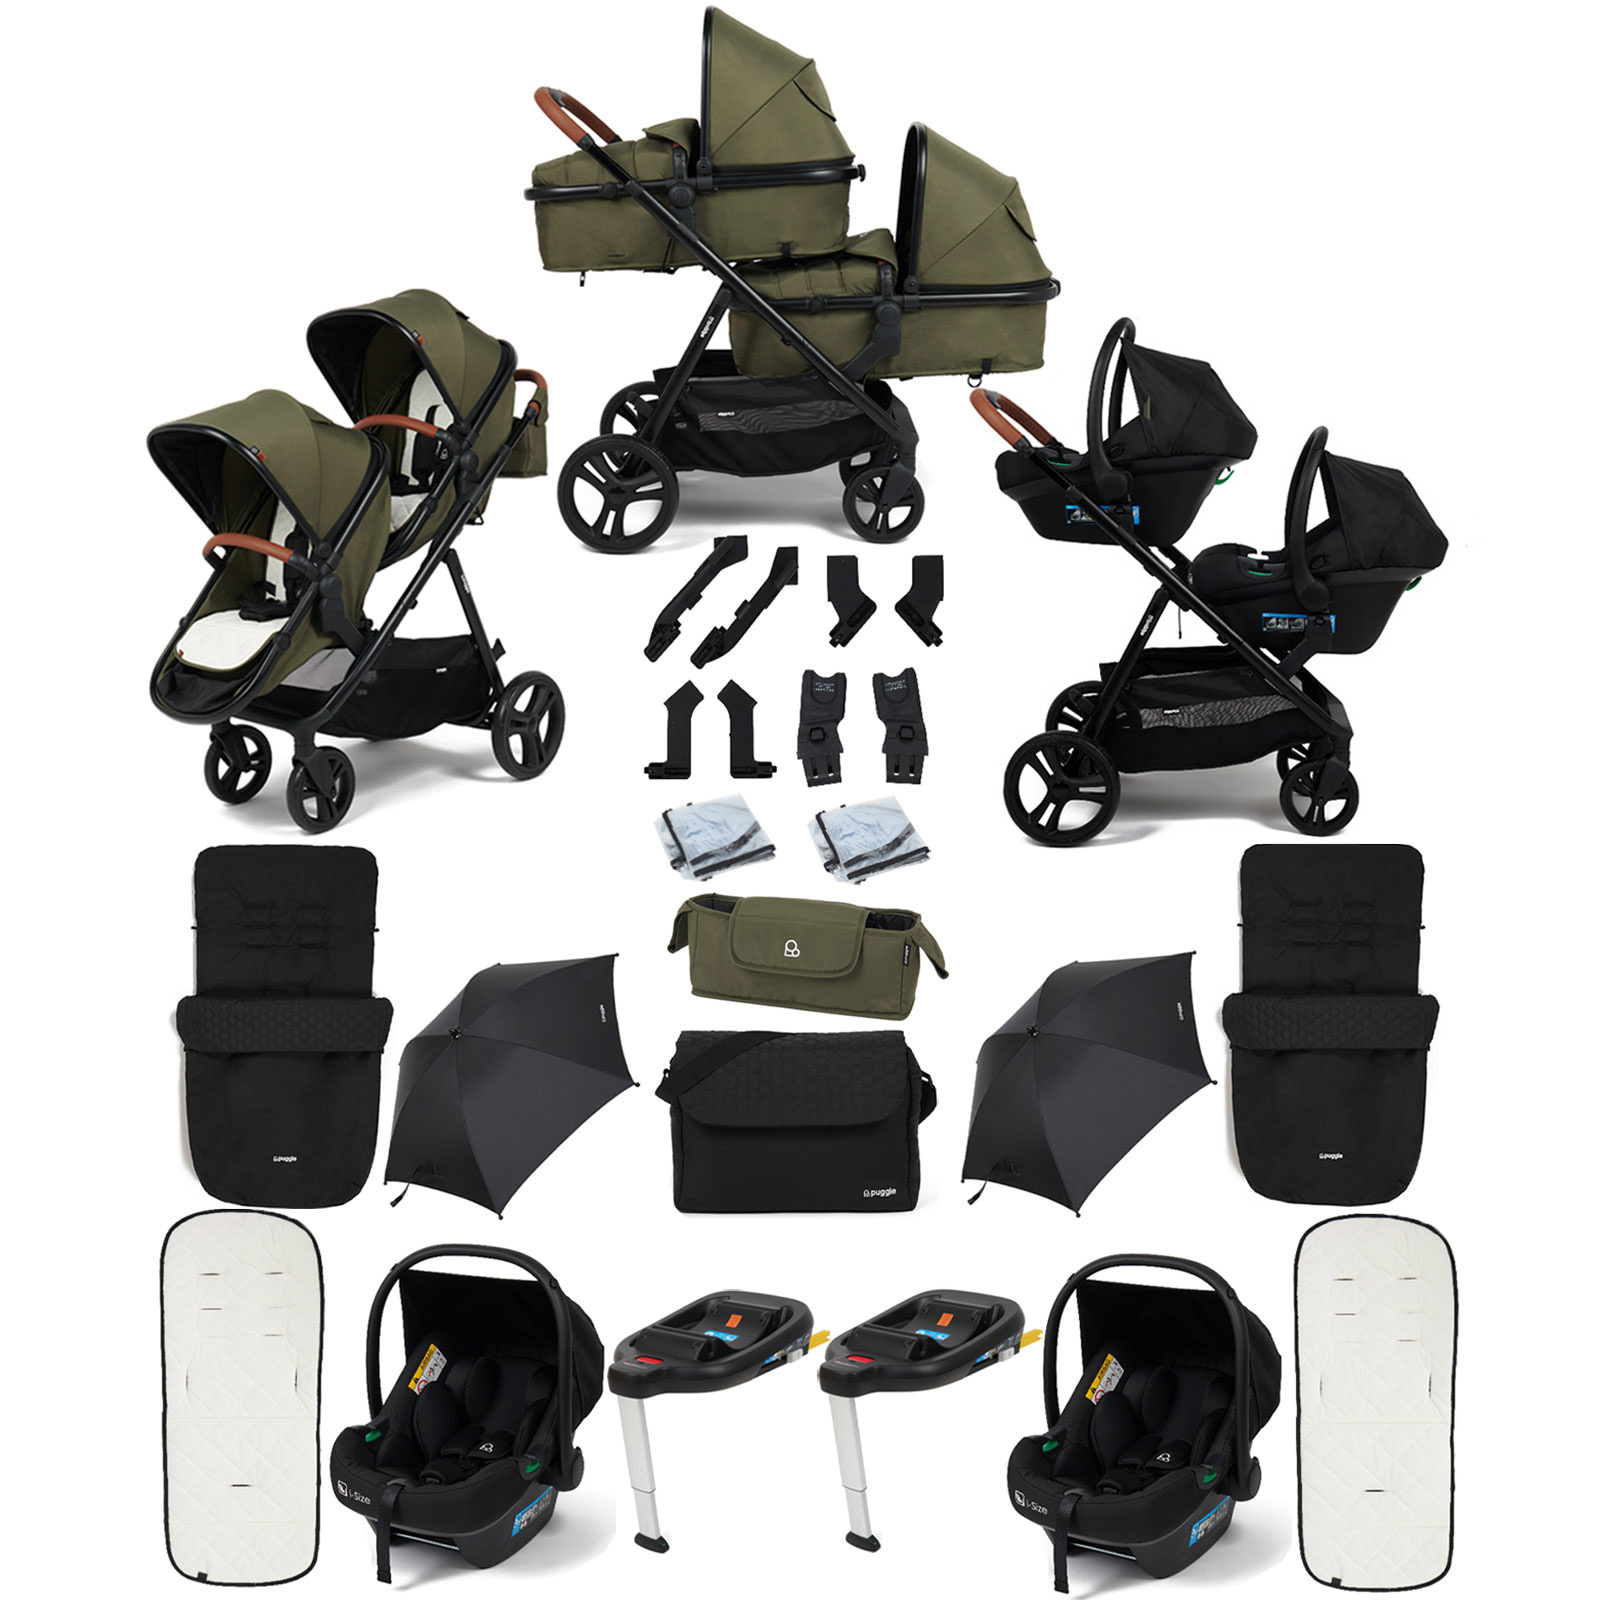 Puggle Memphis 2-in-1 Duo Double Travel System with 2 i-Size Car Seats, 2 ISOFIX Bases, 2 Footmuffs, 2 Parasols, and Changing Bag - Forest Green